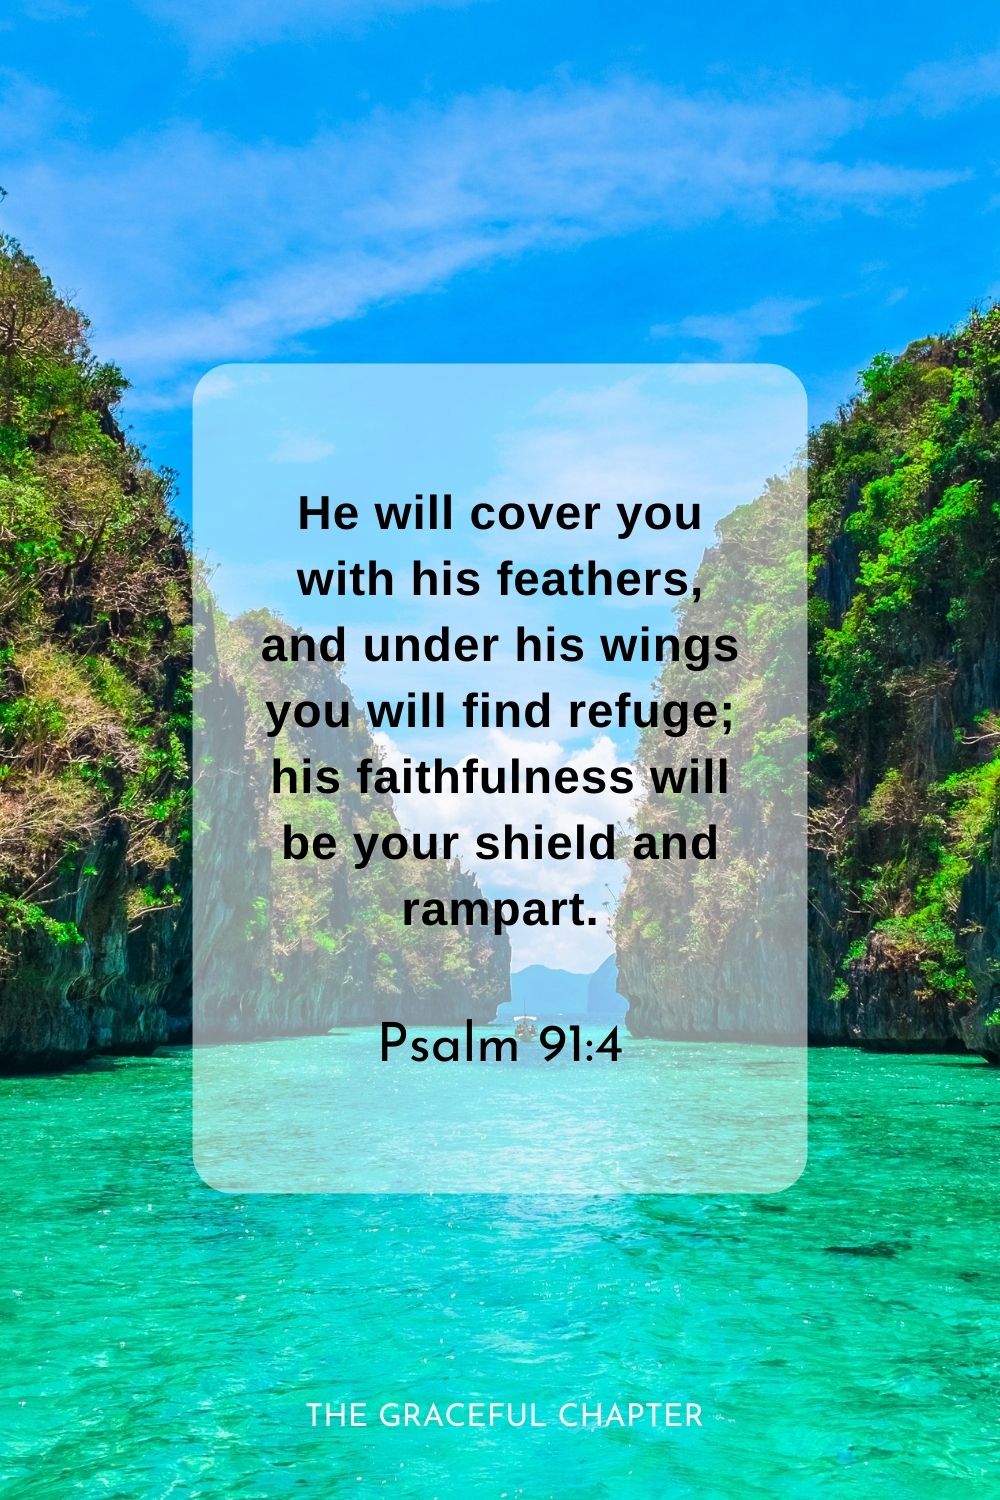 He will cover you with his feathers, and under his wings you will find refuge; his faithfulness will be your shield and rampart.